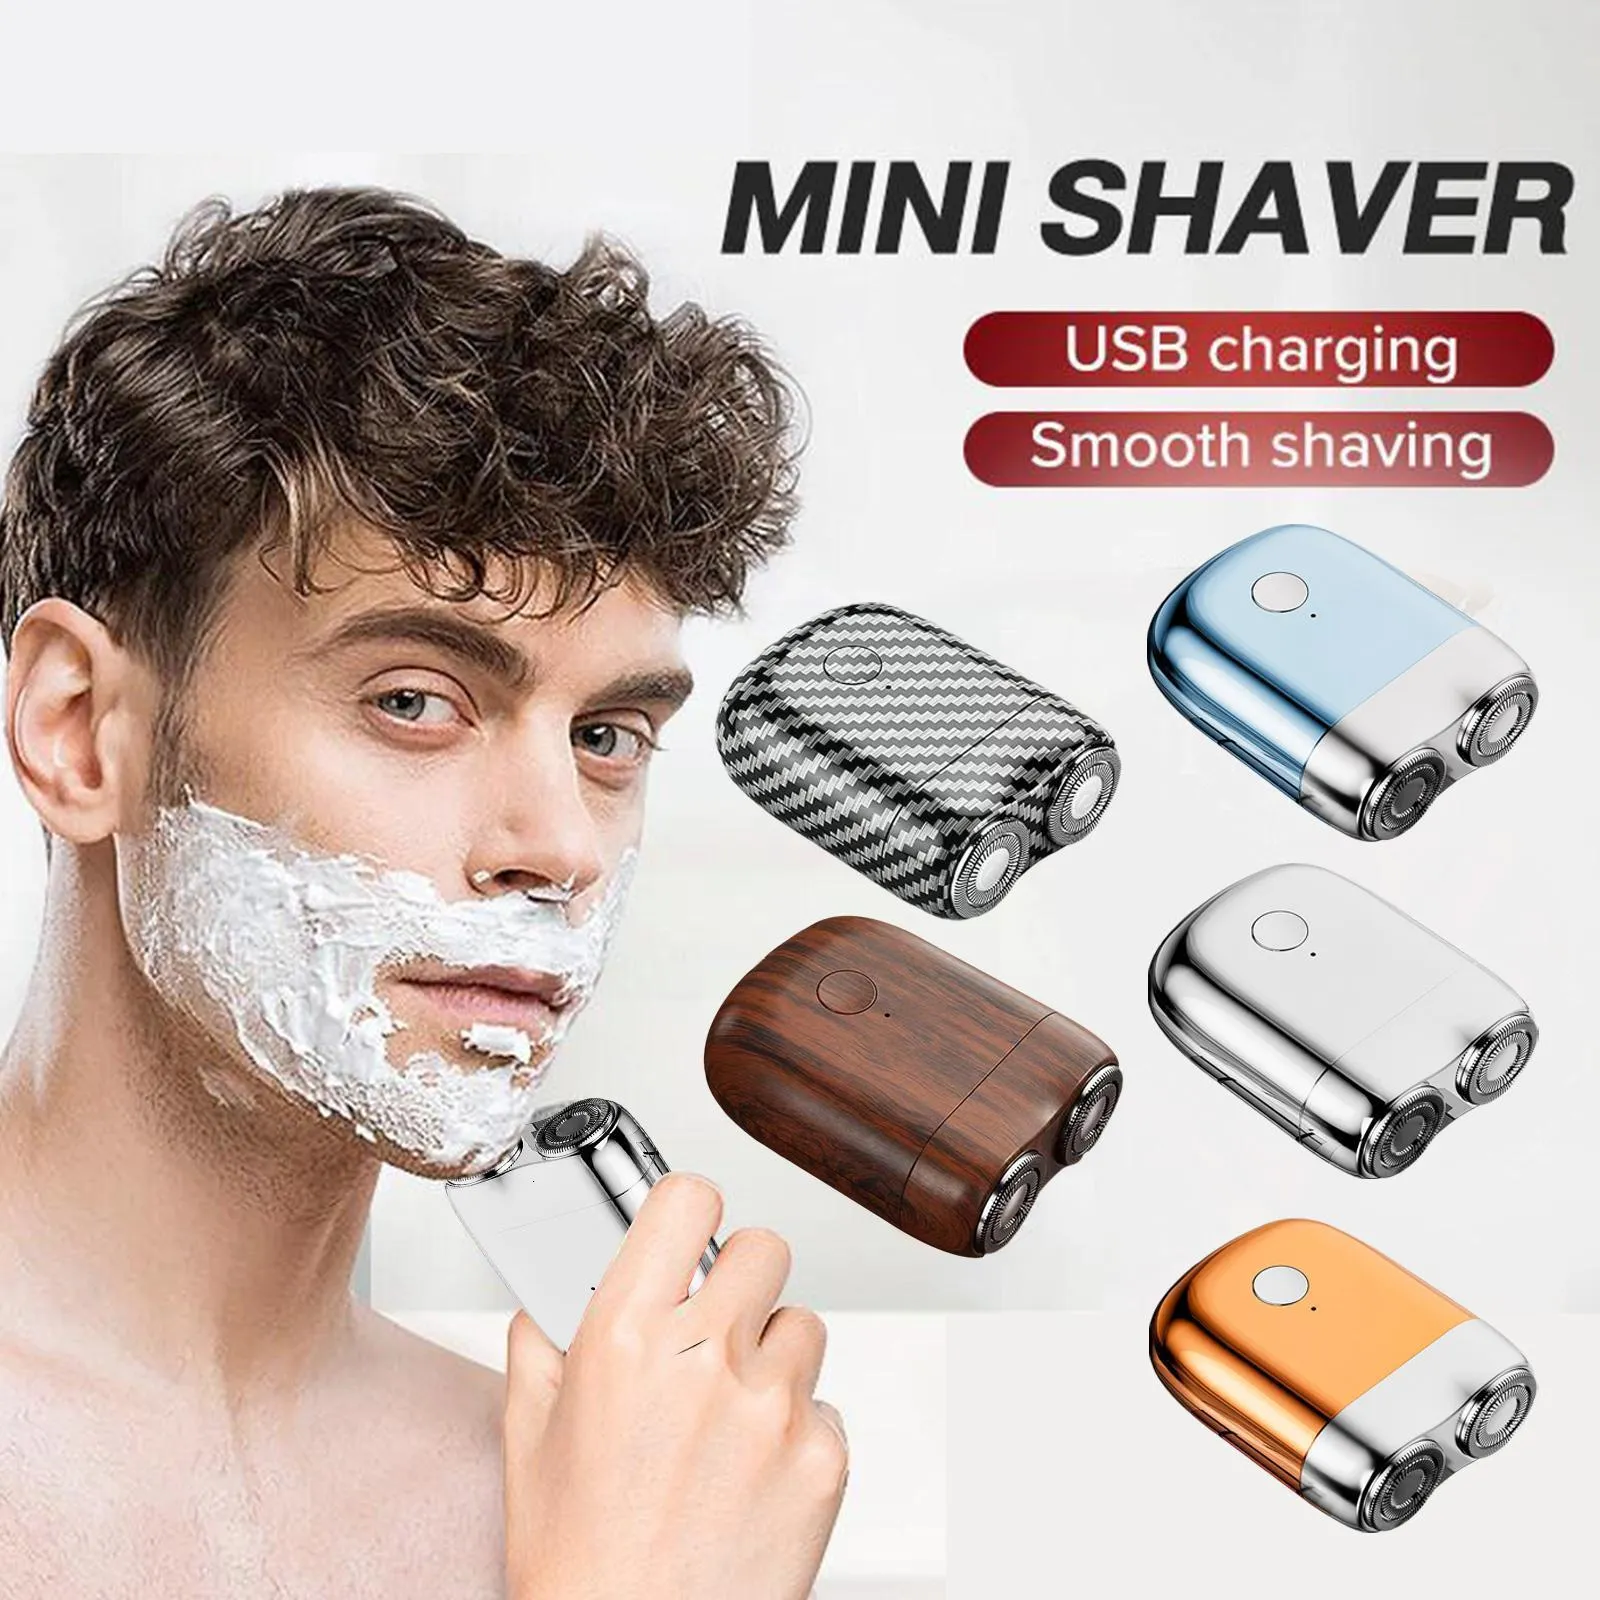 Razors Blades USB Rechargeable Electric Shaver Mini Portable Face Cordless Shavers Wet Dry Painless Small Size Machine Shaving For Men Q1X4 230607